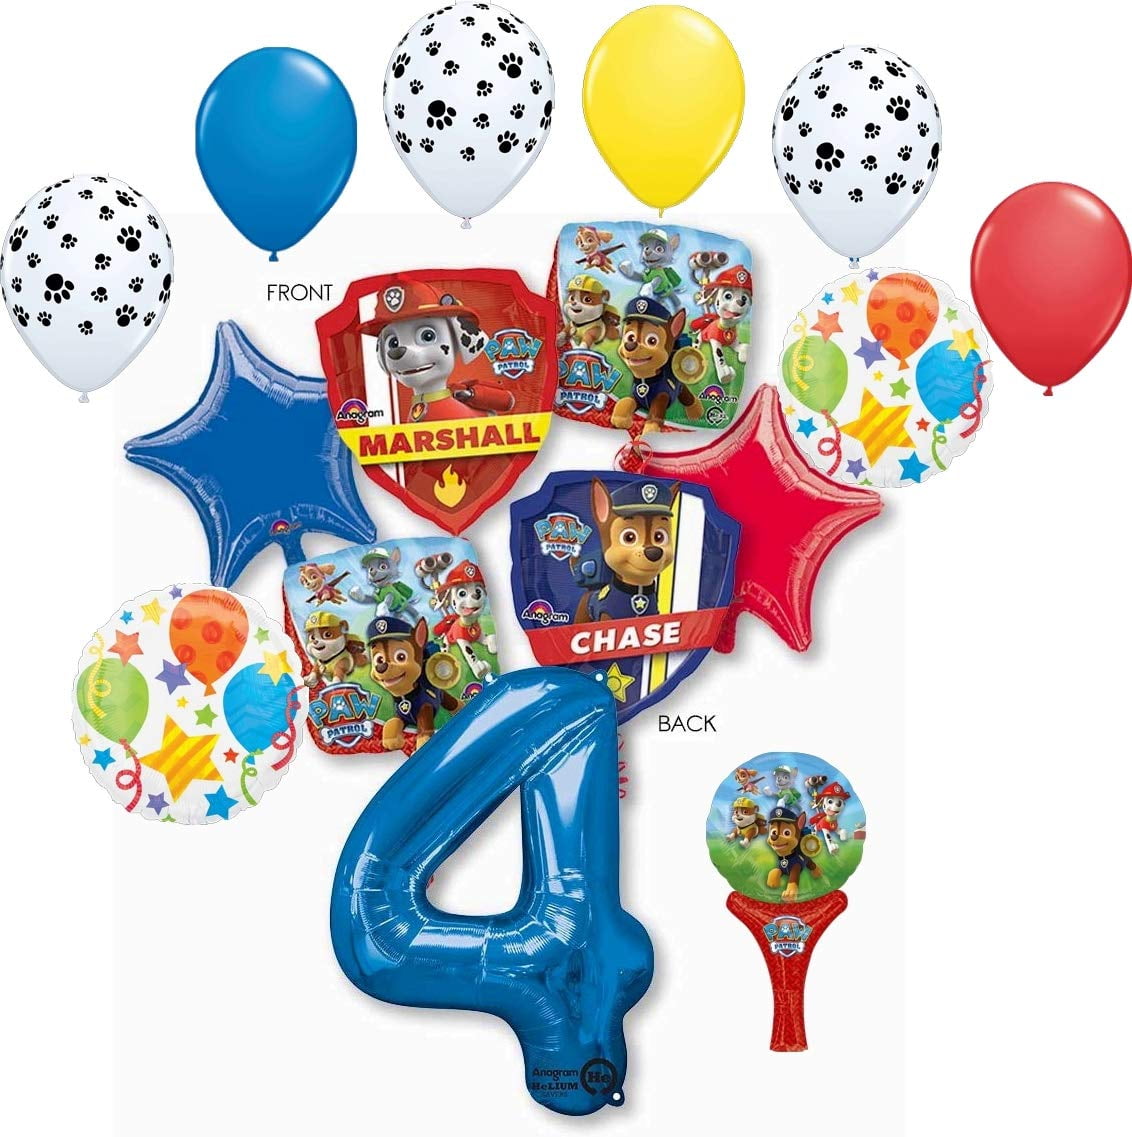 Large Paw Patrol Marshall balloon Birthday Party Foil Air or Helium Fill Balloon